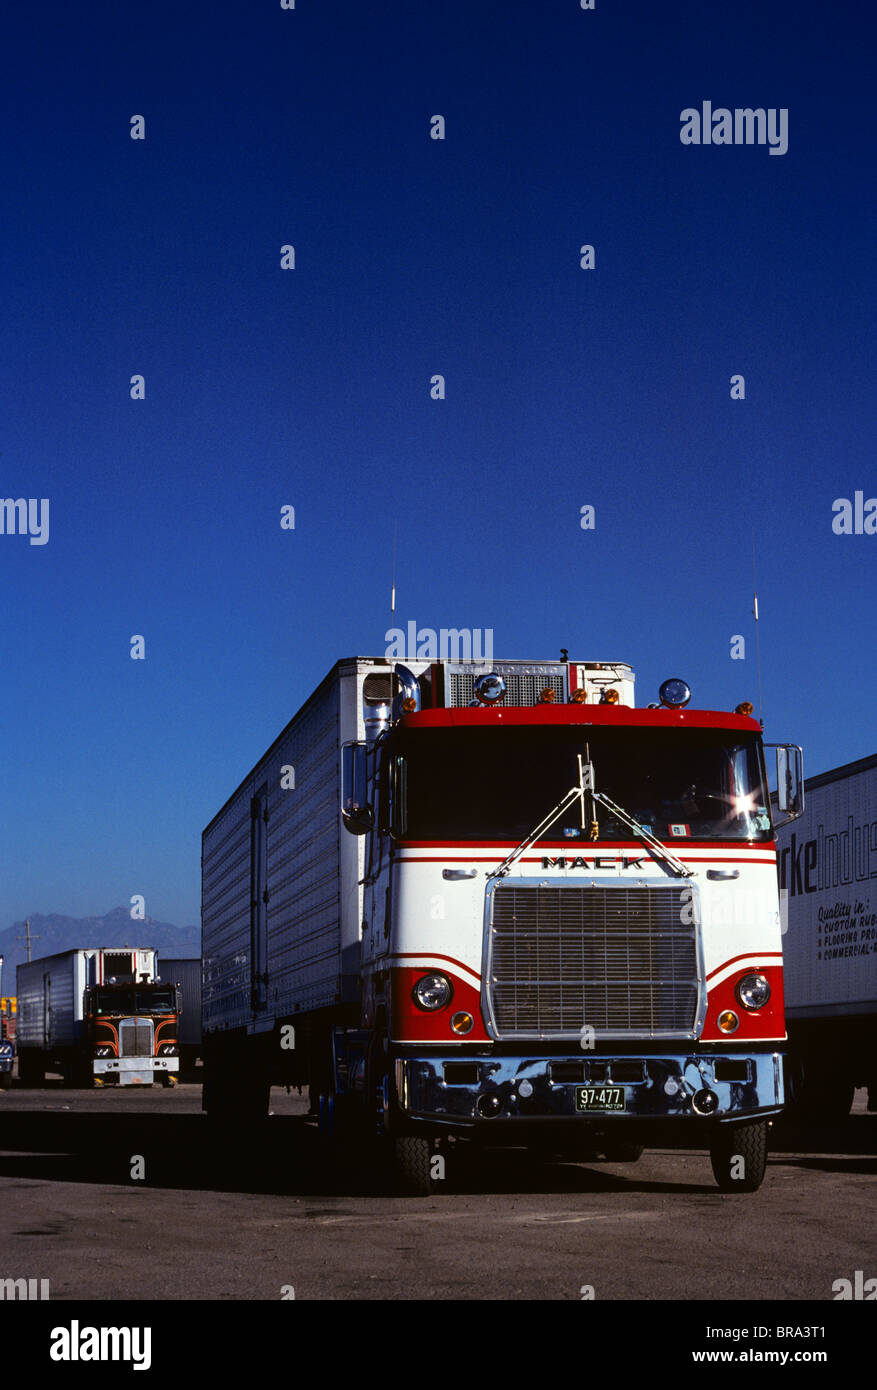 1980s MACK TRUCK PARKED AT TRUCK STOP Stock Photo